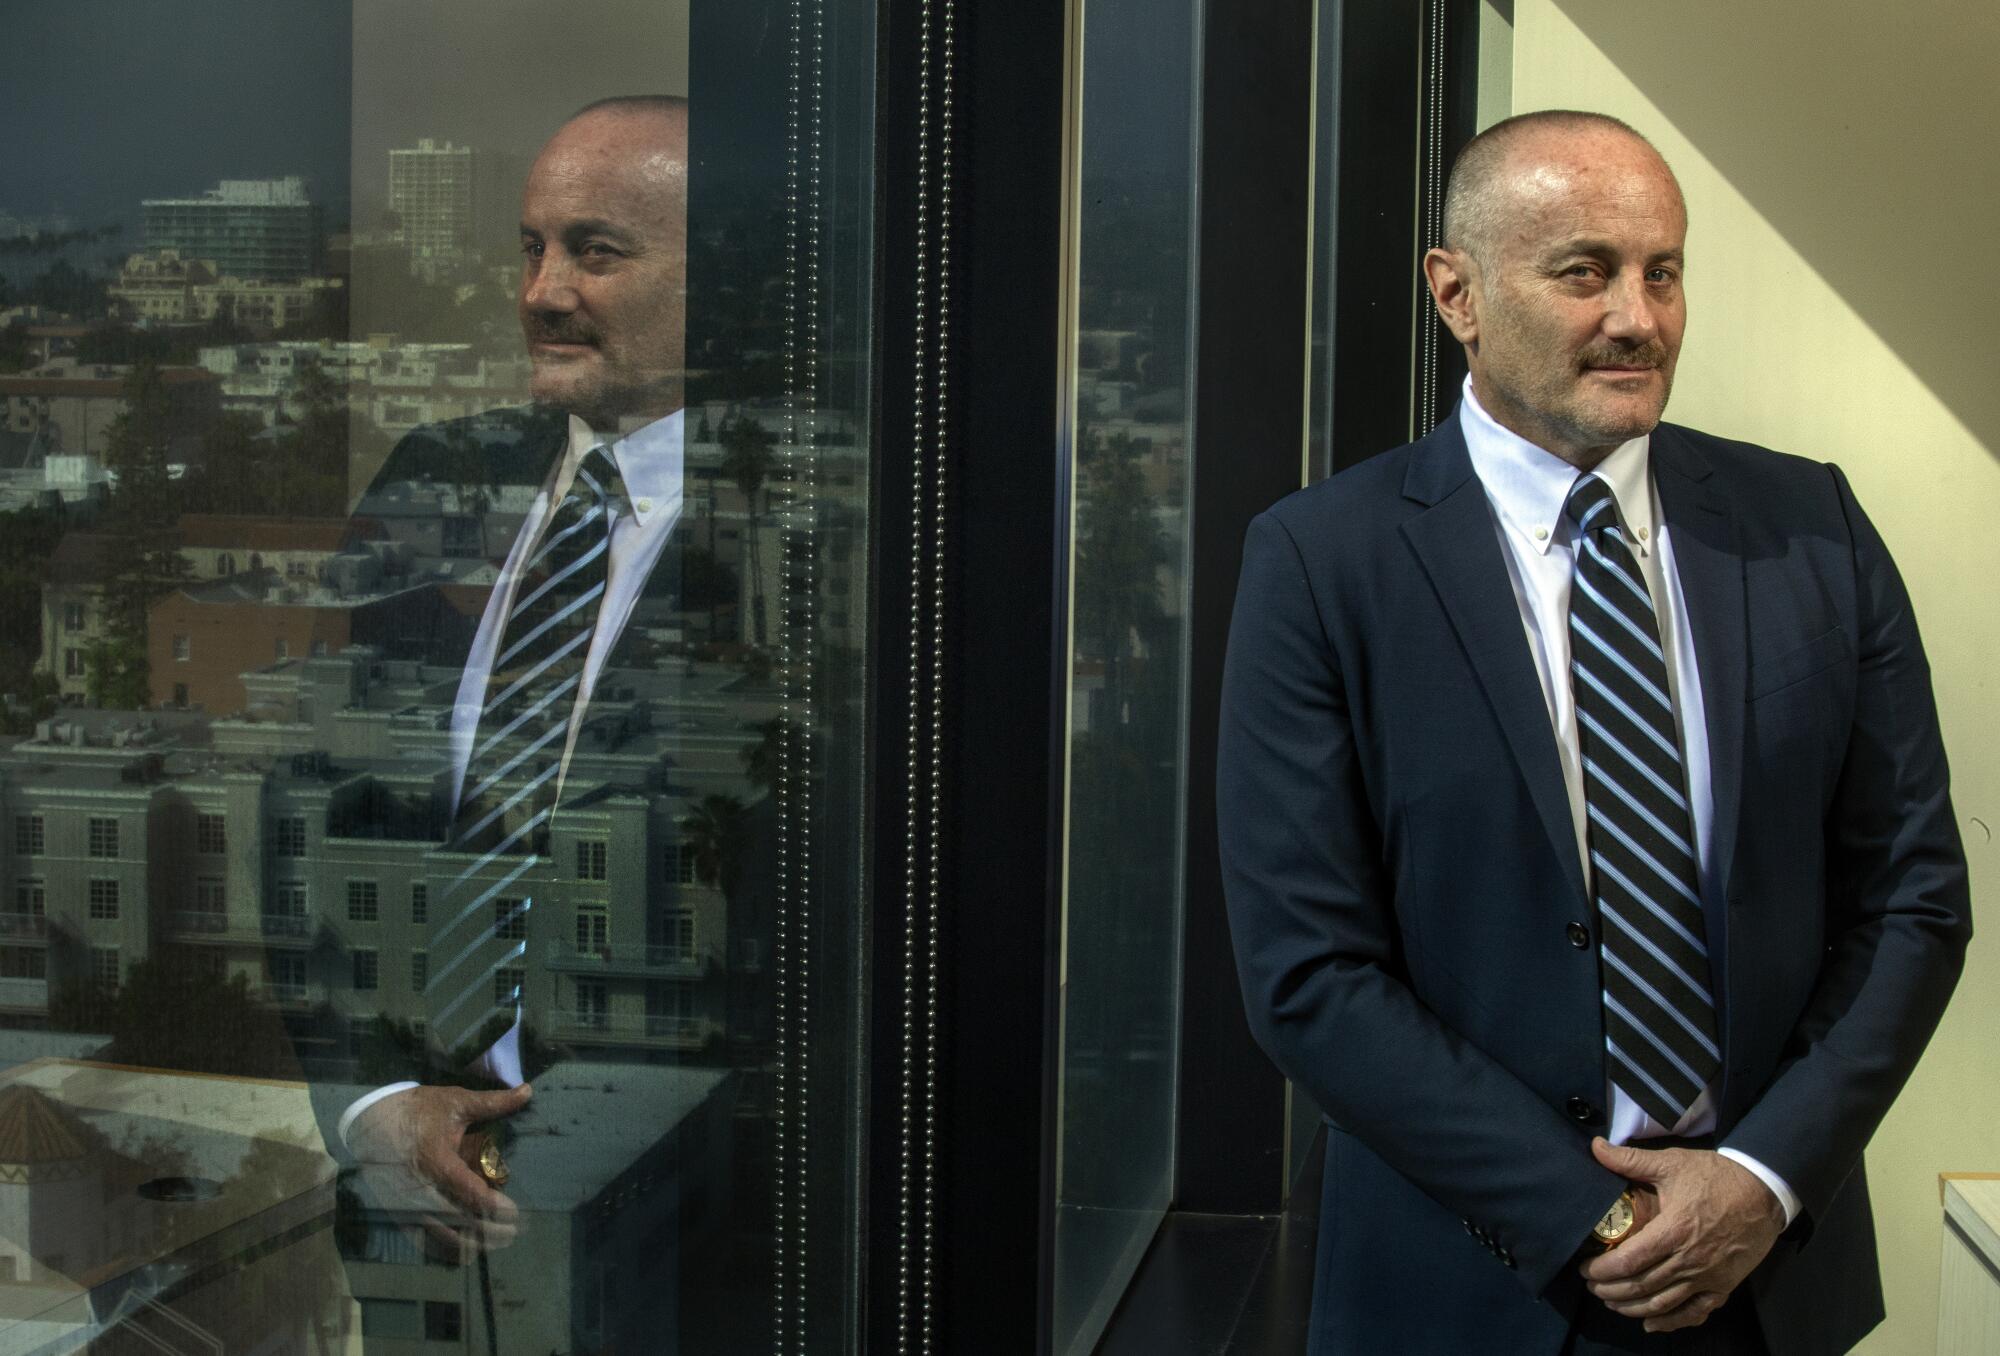 A man in a suit stands next to a window in an office building.